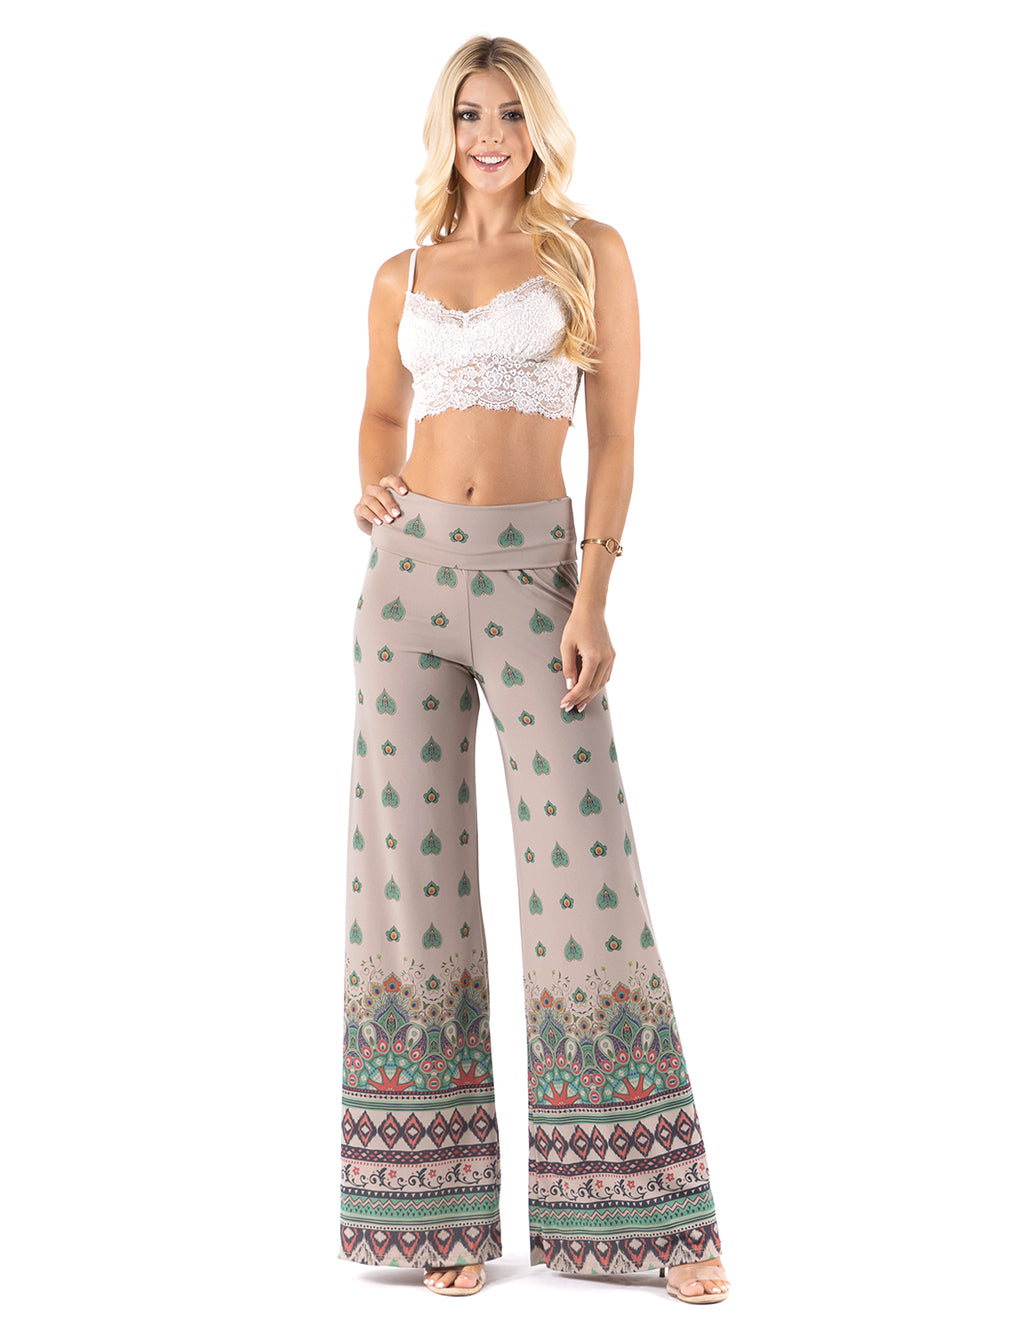 Beautiful woman wearing this amazing Tan & Green Floral High waist palazzo pants featuring pockets, wide legs, and a comfortable stretchy fabric Perfect for any activity,relaxing day,beautiful and unique,comfortable and flattering